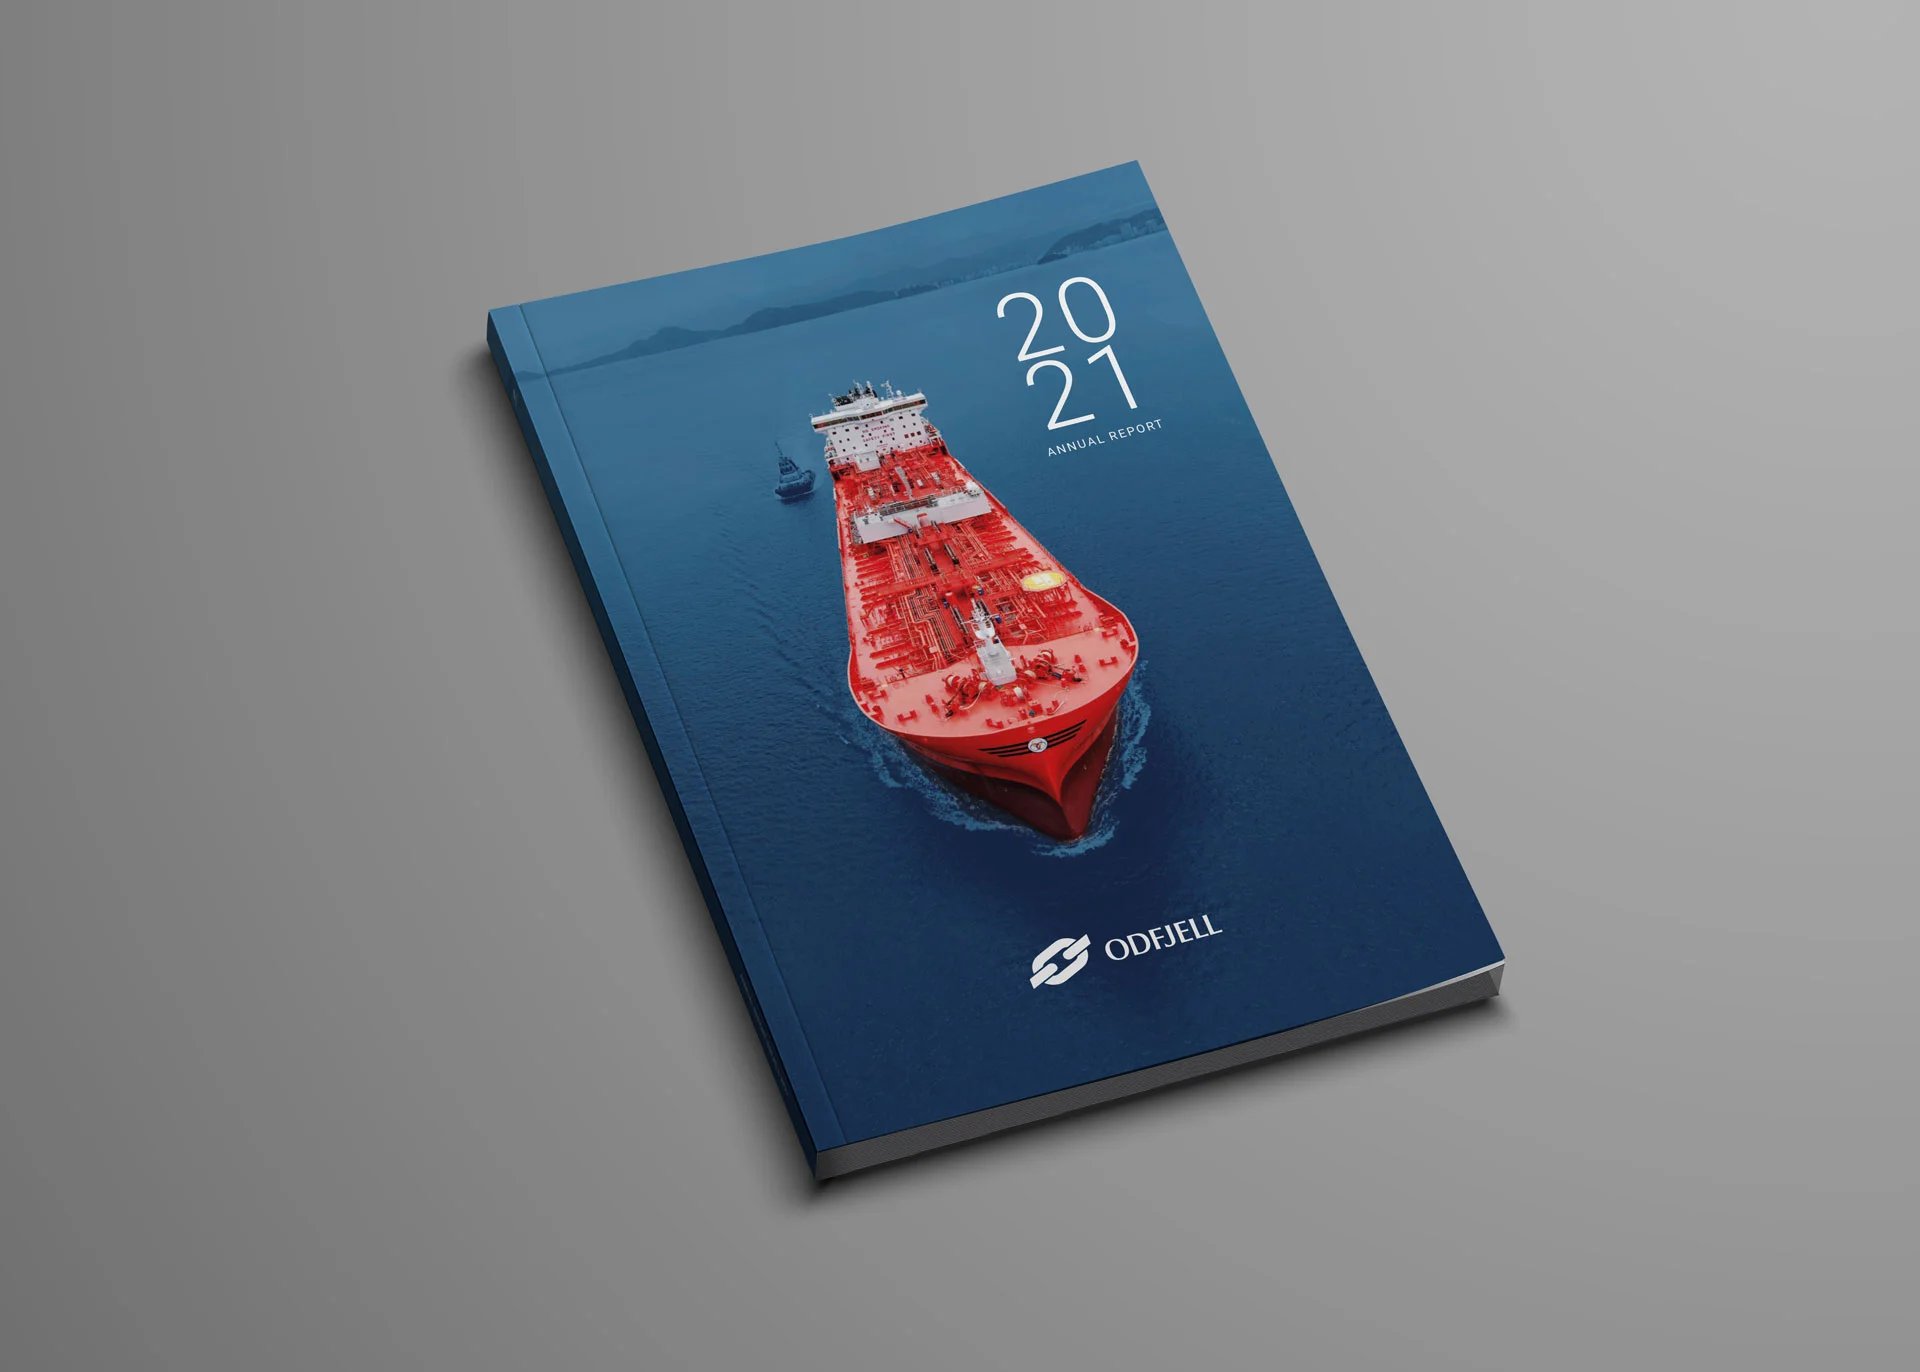 Odfjell_se_aarsrapport-2021_3d_web-1-1